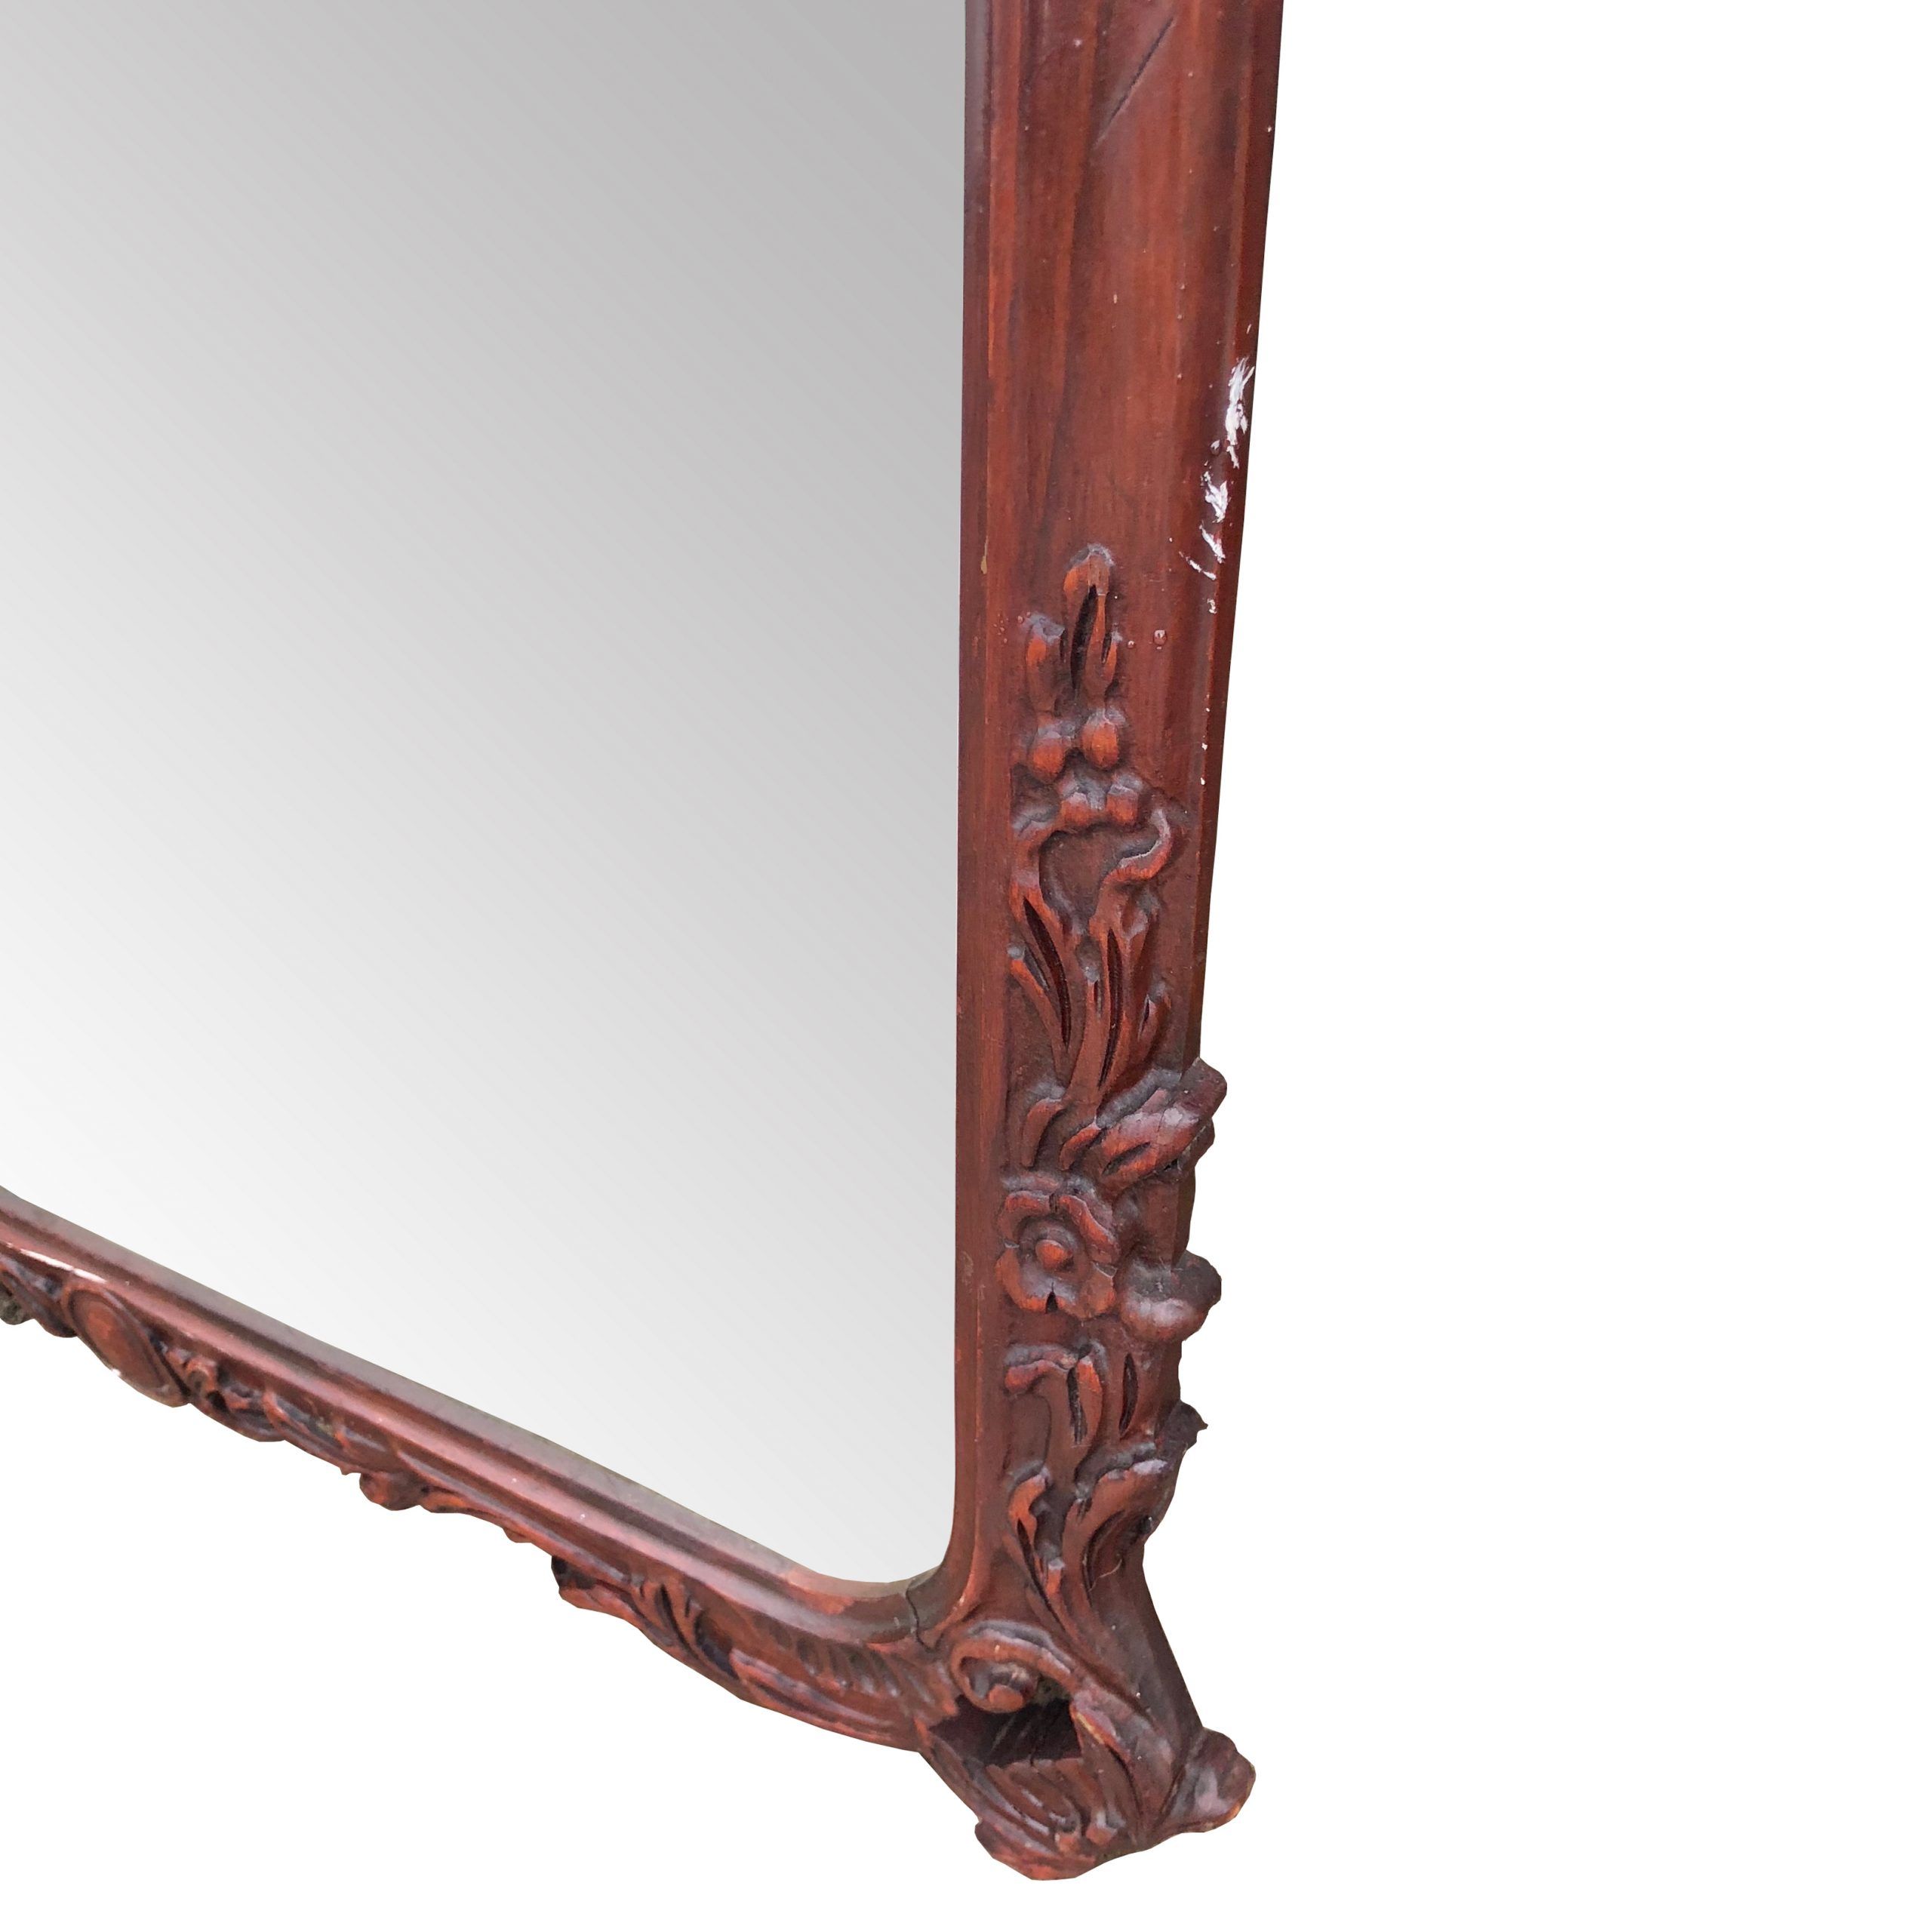 Large Antique Victorian Heavily Carved Walnut Wall Mirror 2X4 Pertaining To Walnut Wall Mirrors (View 12 of 15)